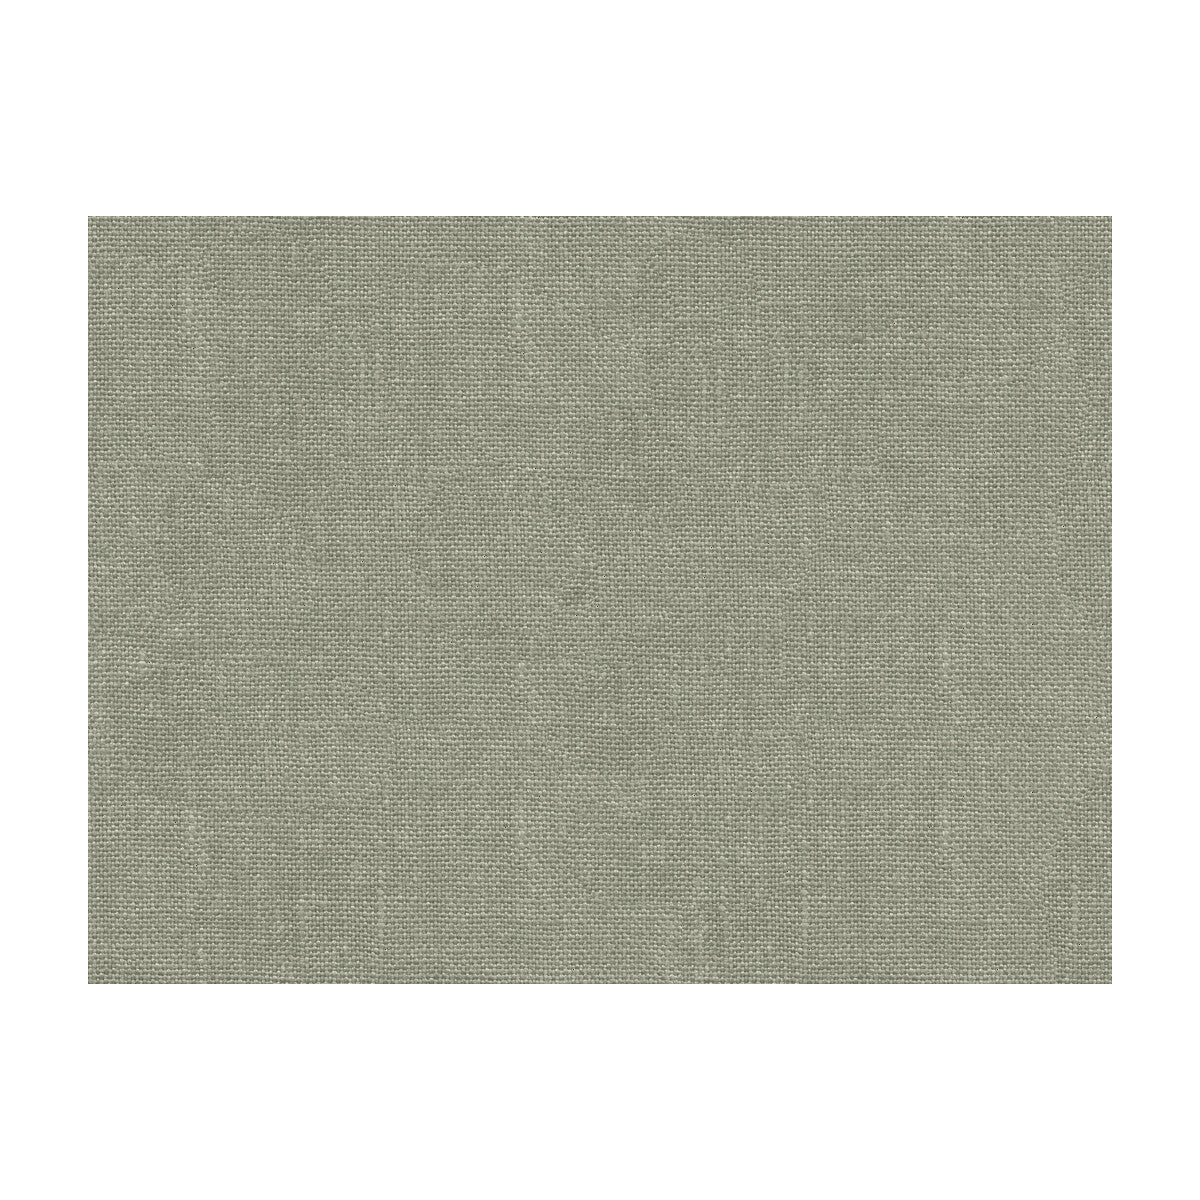 Cheshire Linen fabric in cadet grey color - pattern 2015148.11.0 - by Lee Jofa in the Colour Library VII collection